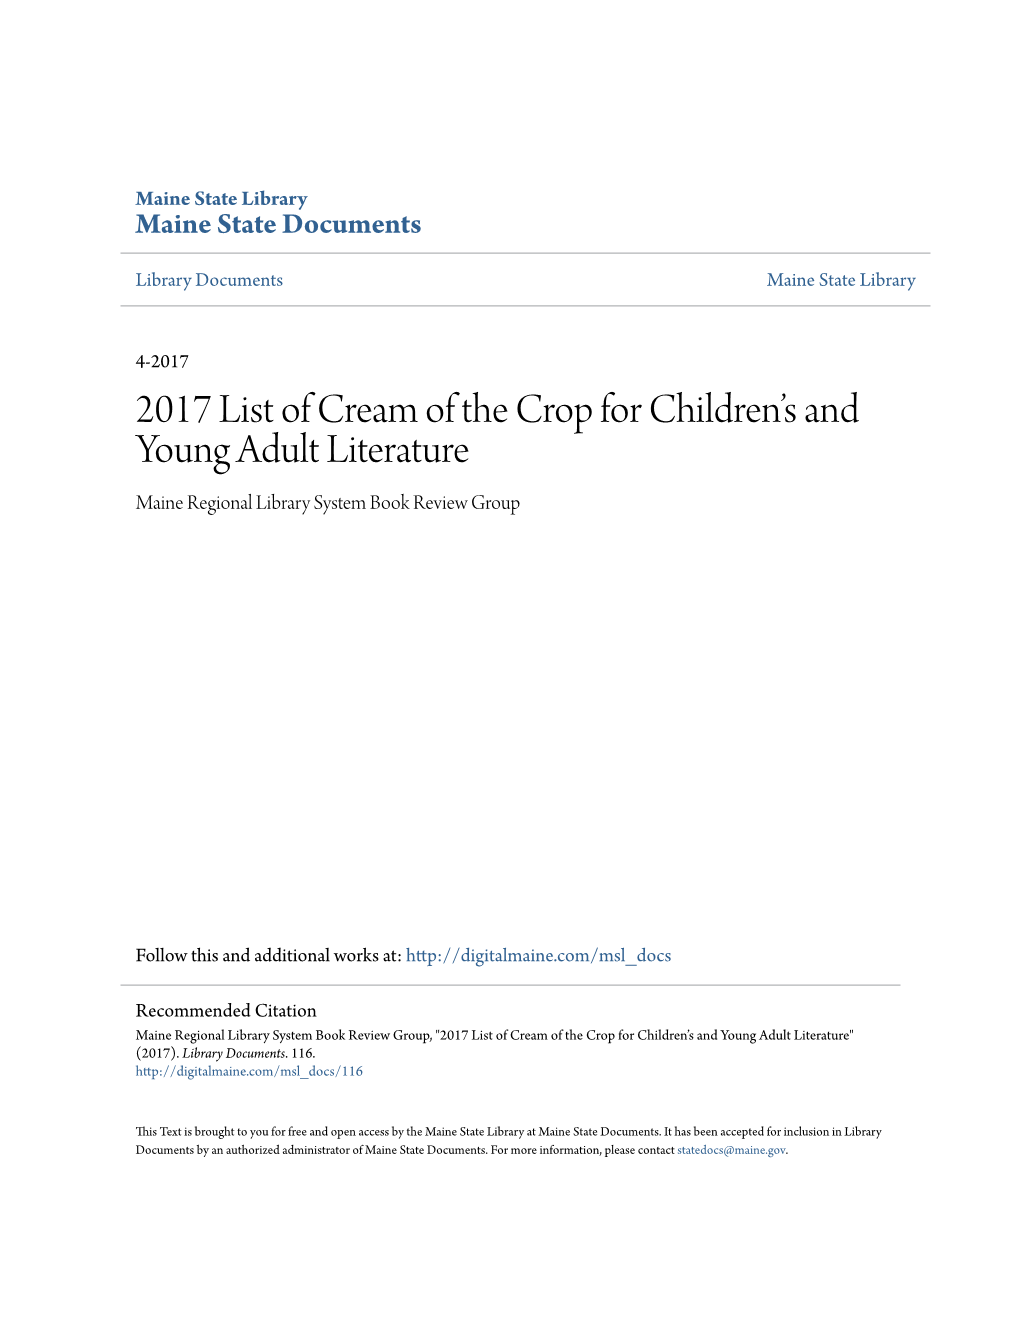 2017 List of Cream of the Crop for Children's and Young Adult Literature